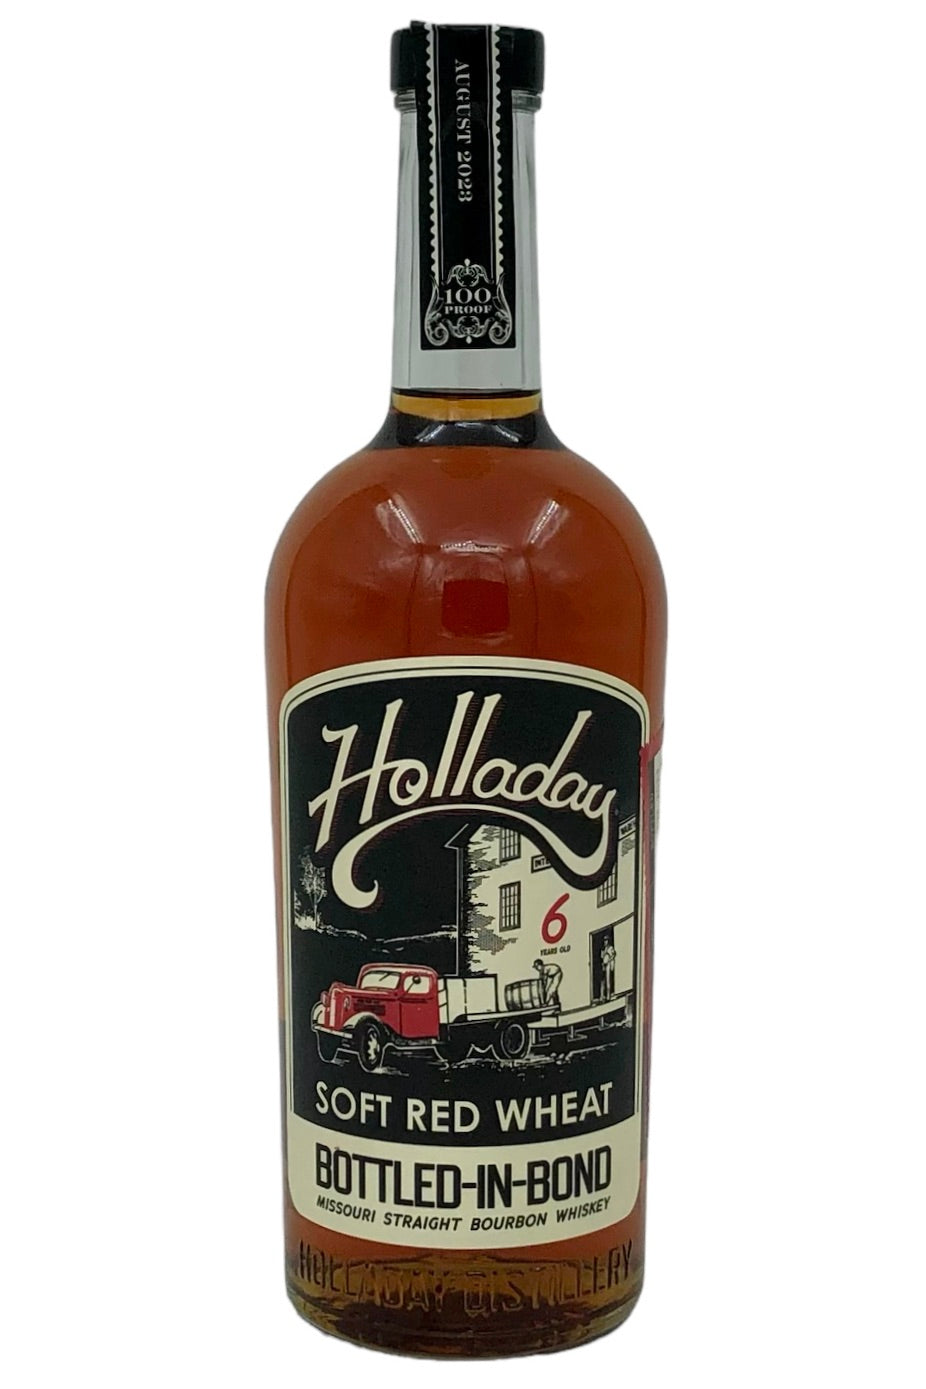 Ben Holladay &quot;Soft Red Wheat&quot; Bottled-in-Bond 6 Year old Missouri Straight Bourbon Whiskey